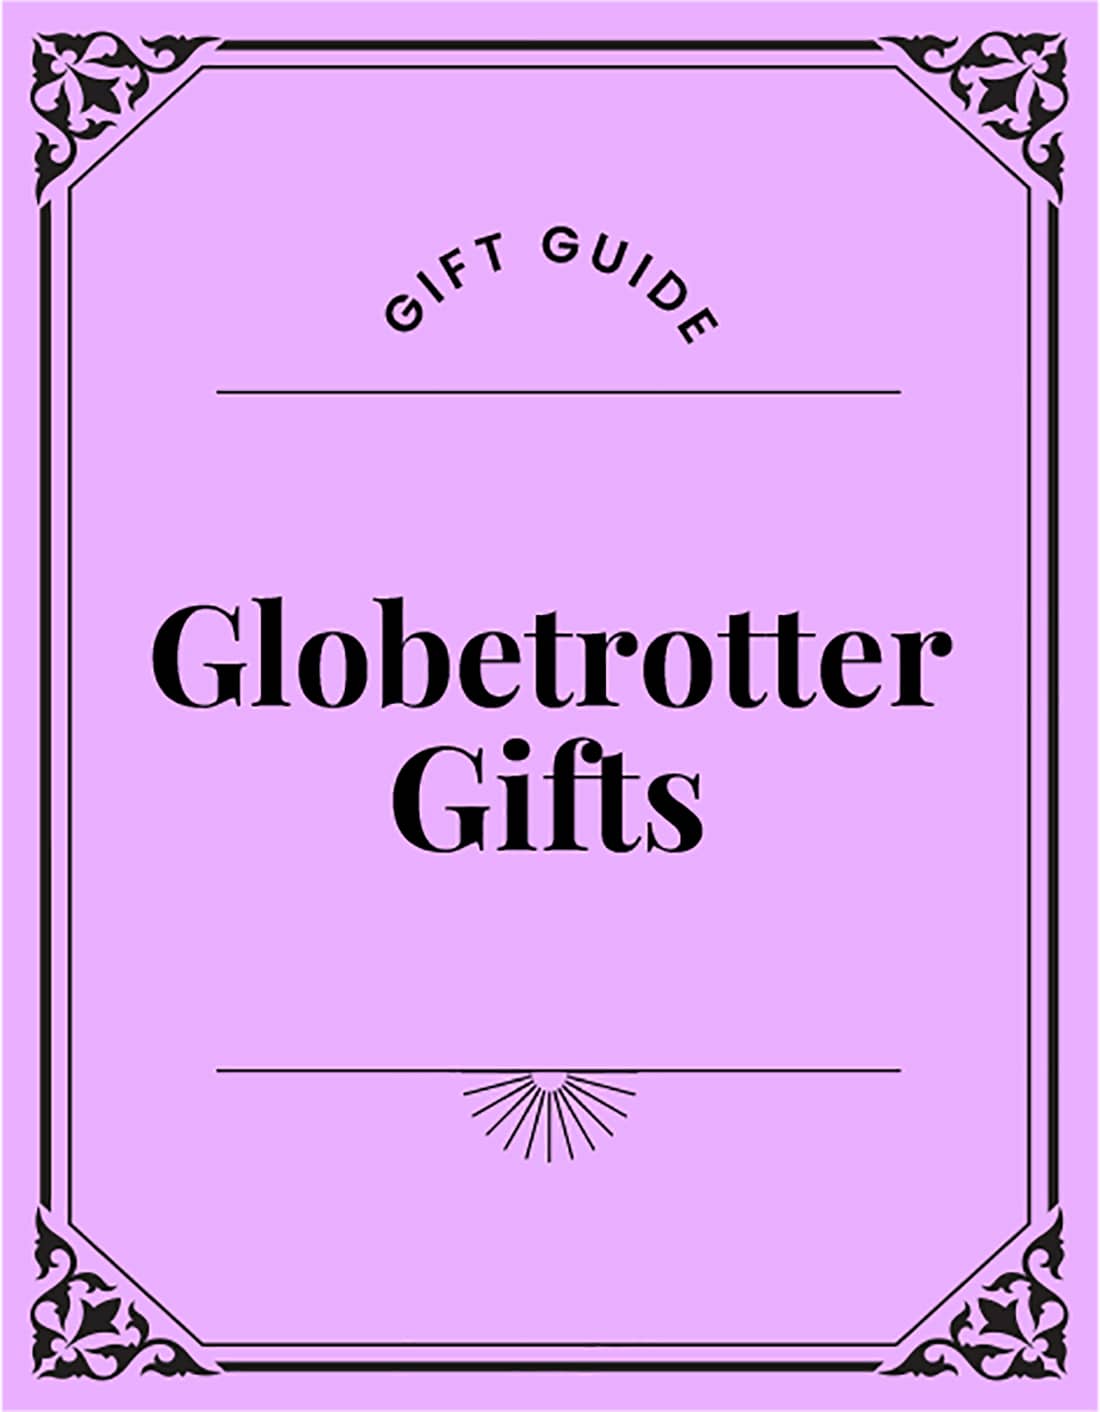 Gift Guide. Globetrotter Gifts